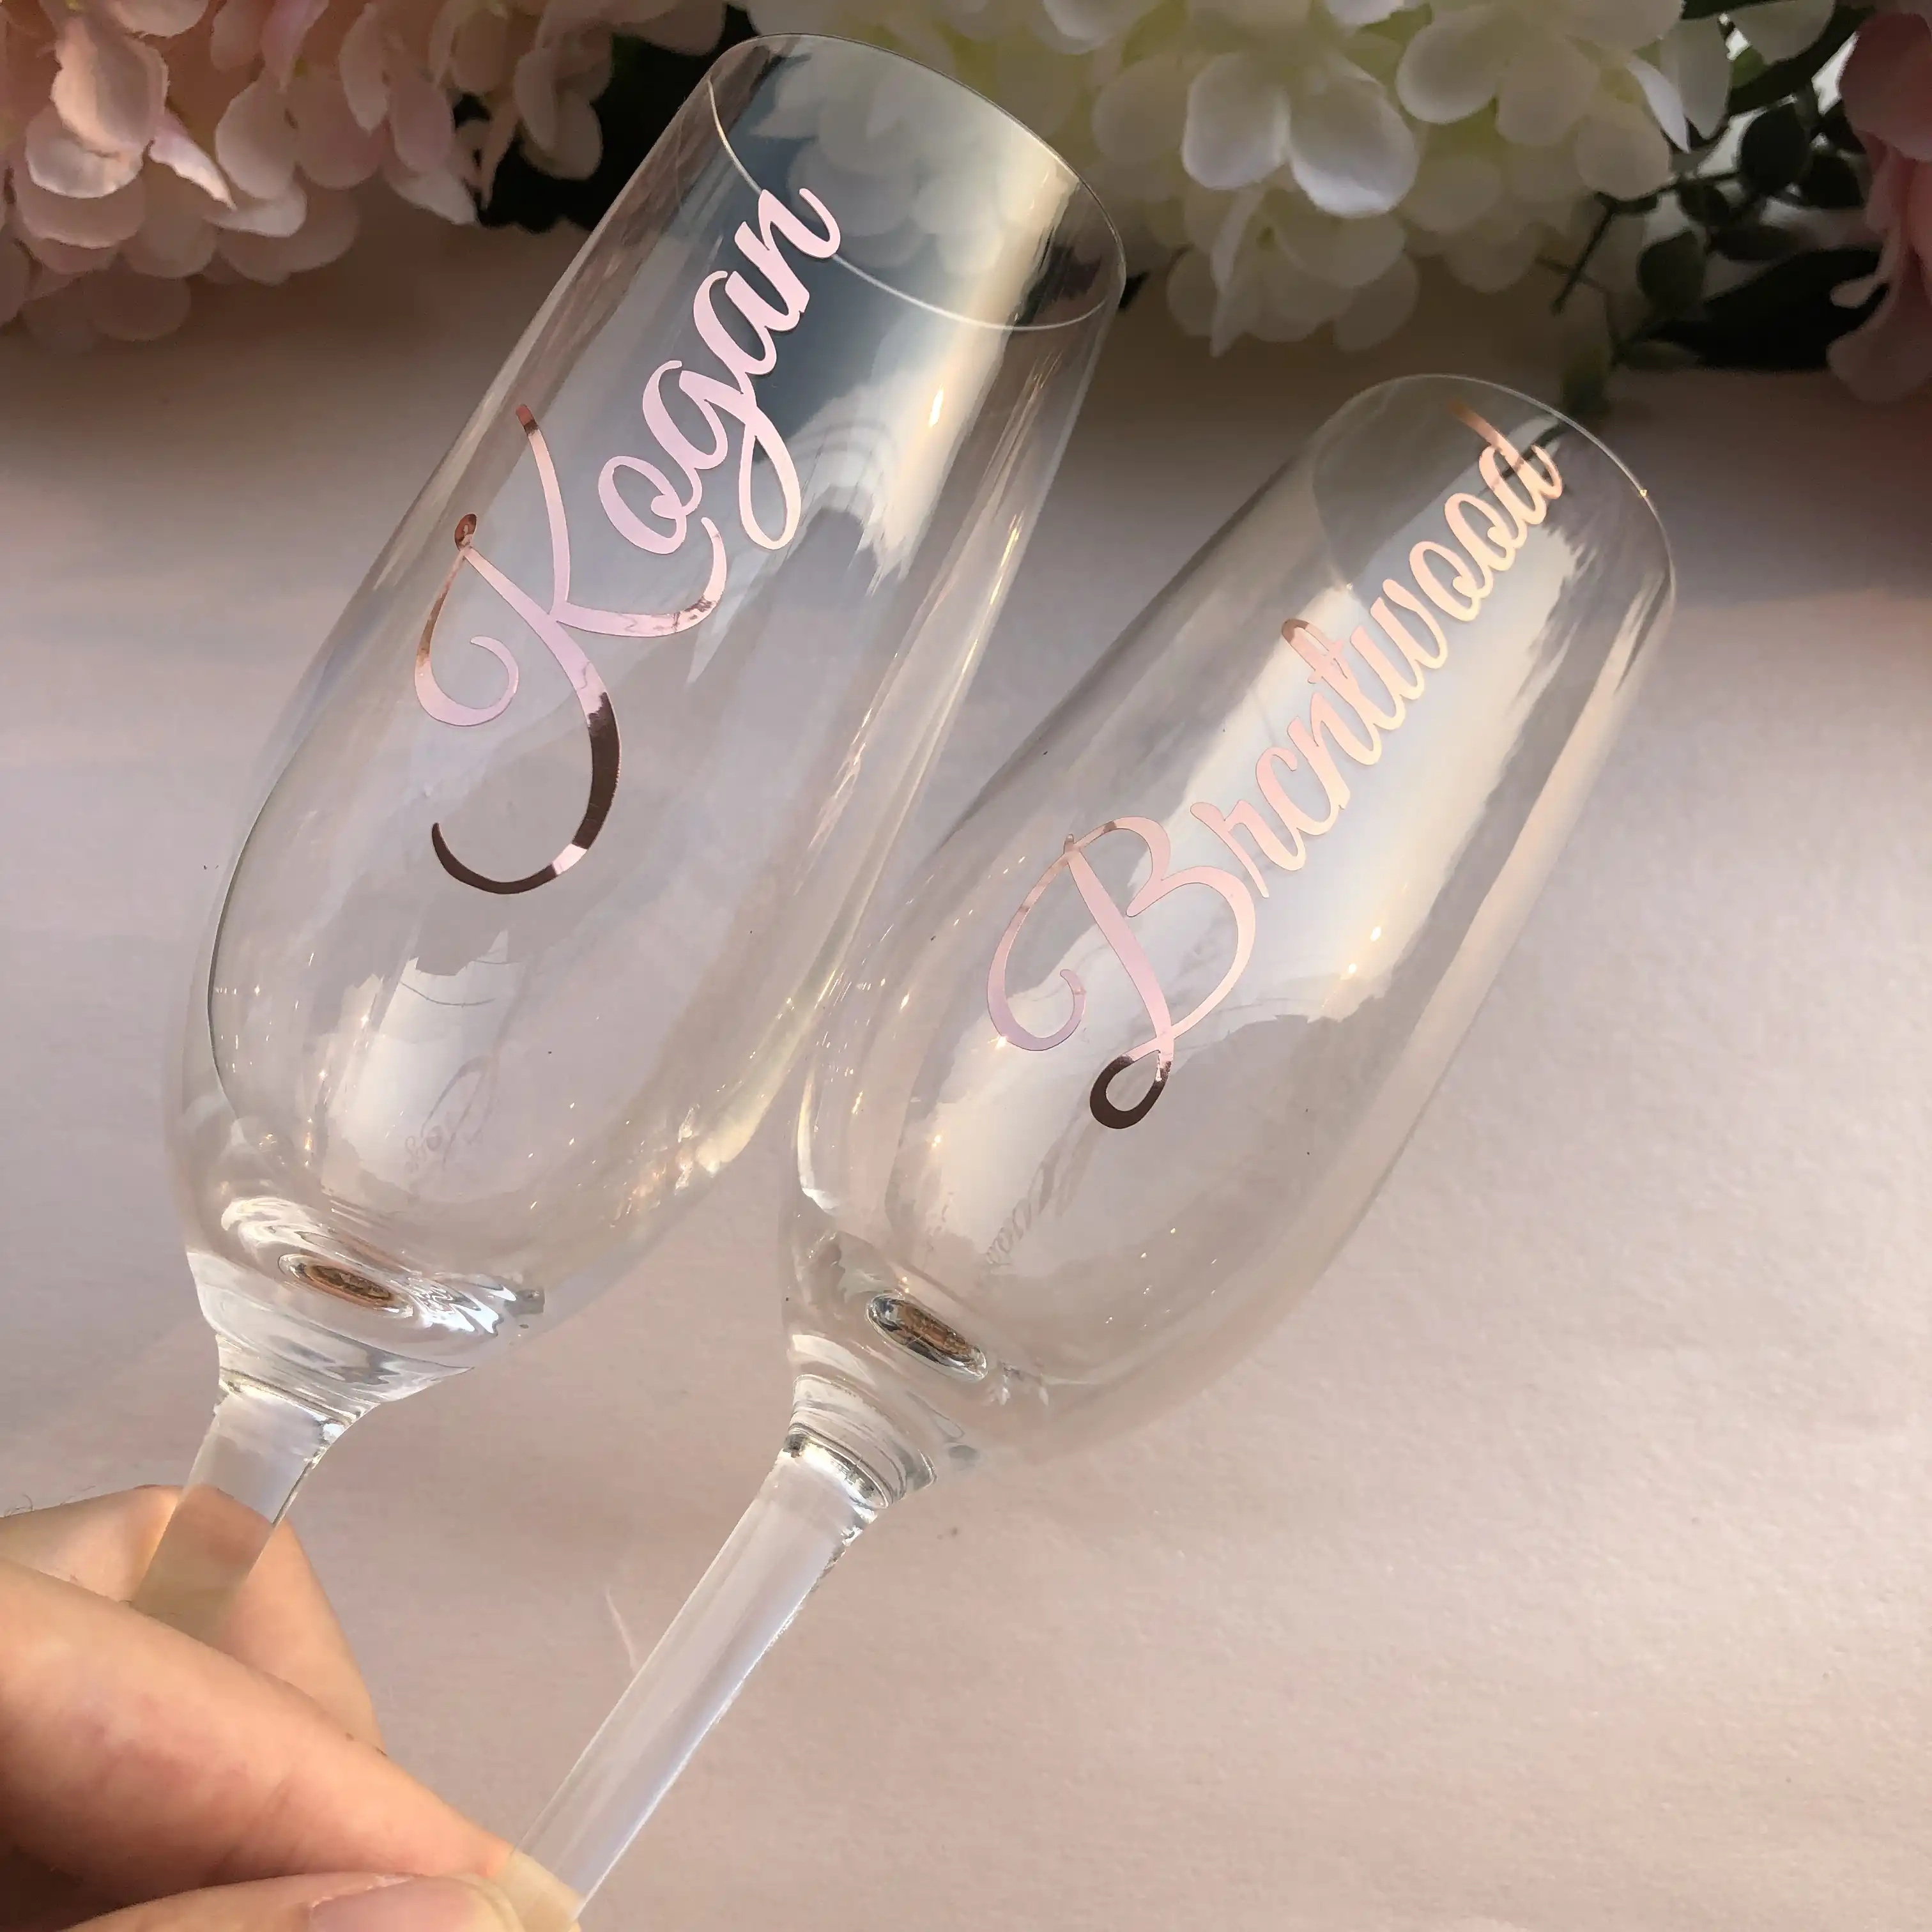 Bachelorette Party Gifts Personalized glasses Bridal Party Gifts Bridal Party Wine Glasses Bridesmaid Gifts Bride Tribe Wine Glasses